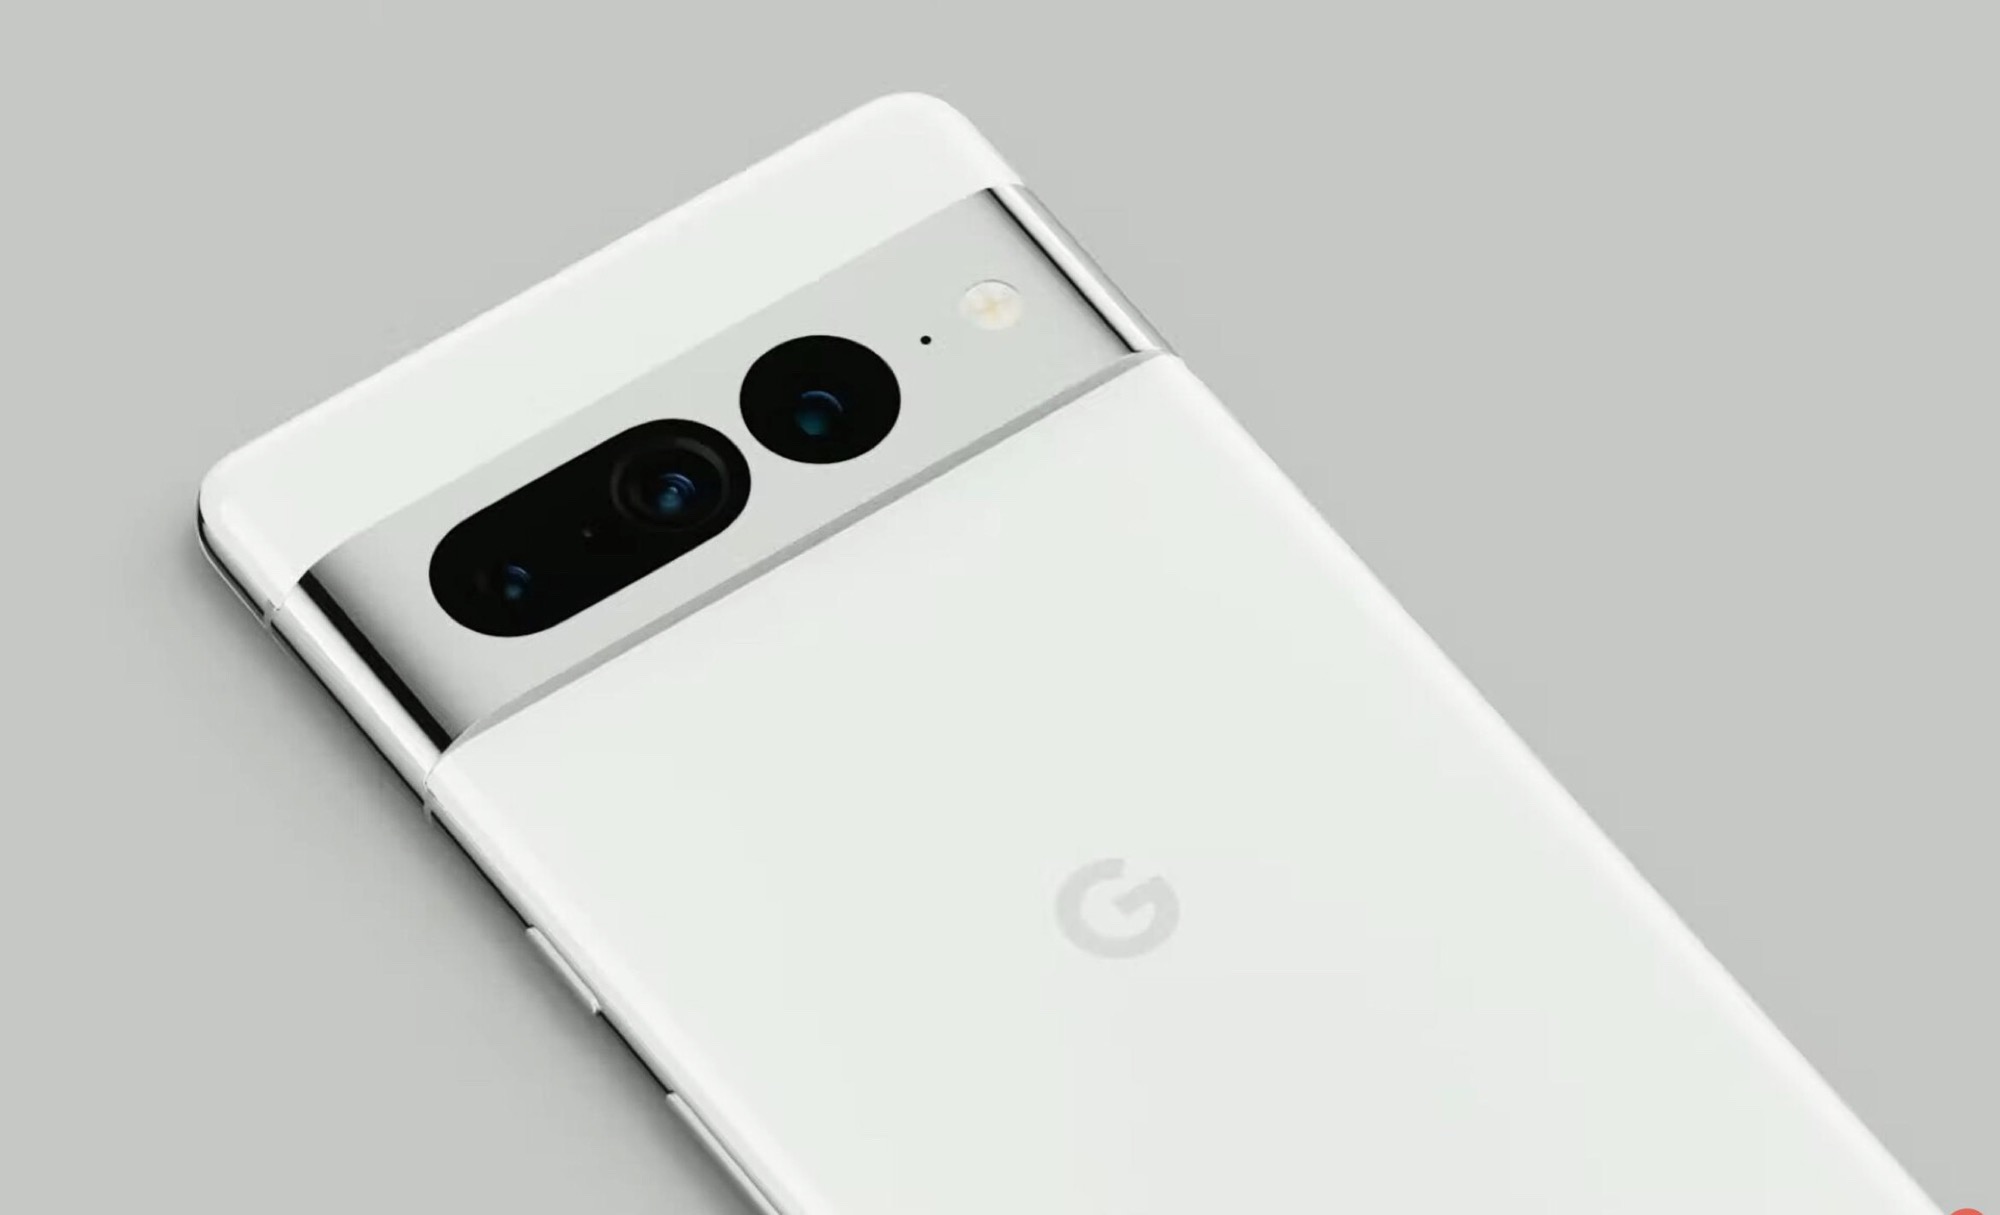 In North America, Google Pixel has captured 2% of the market and is experiencing explosive rise in sales